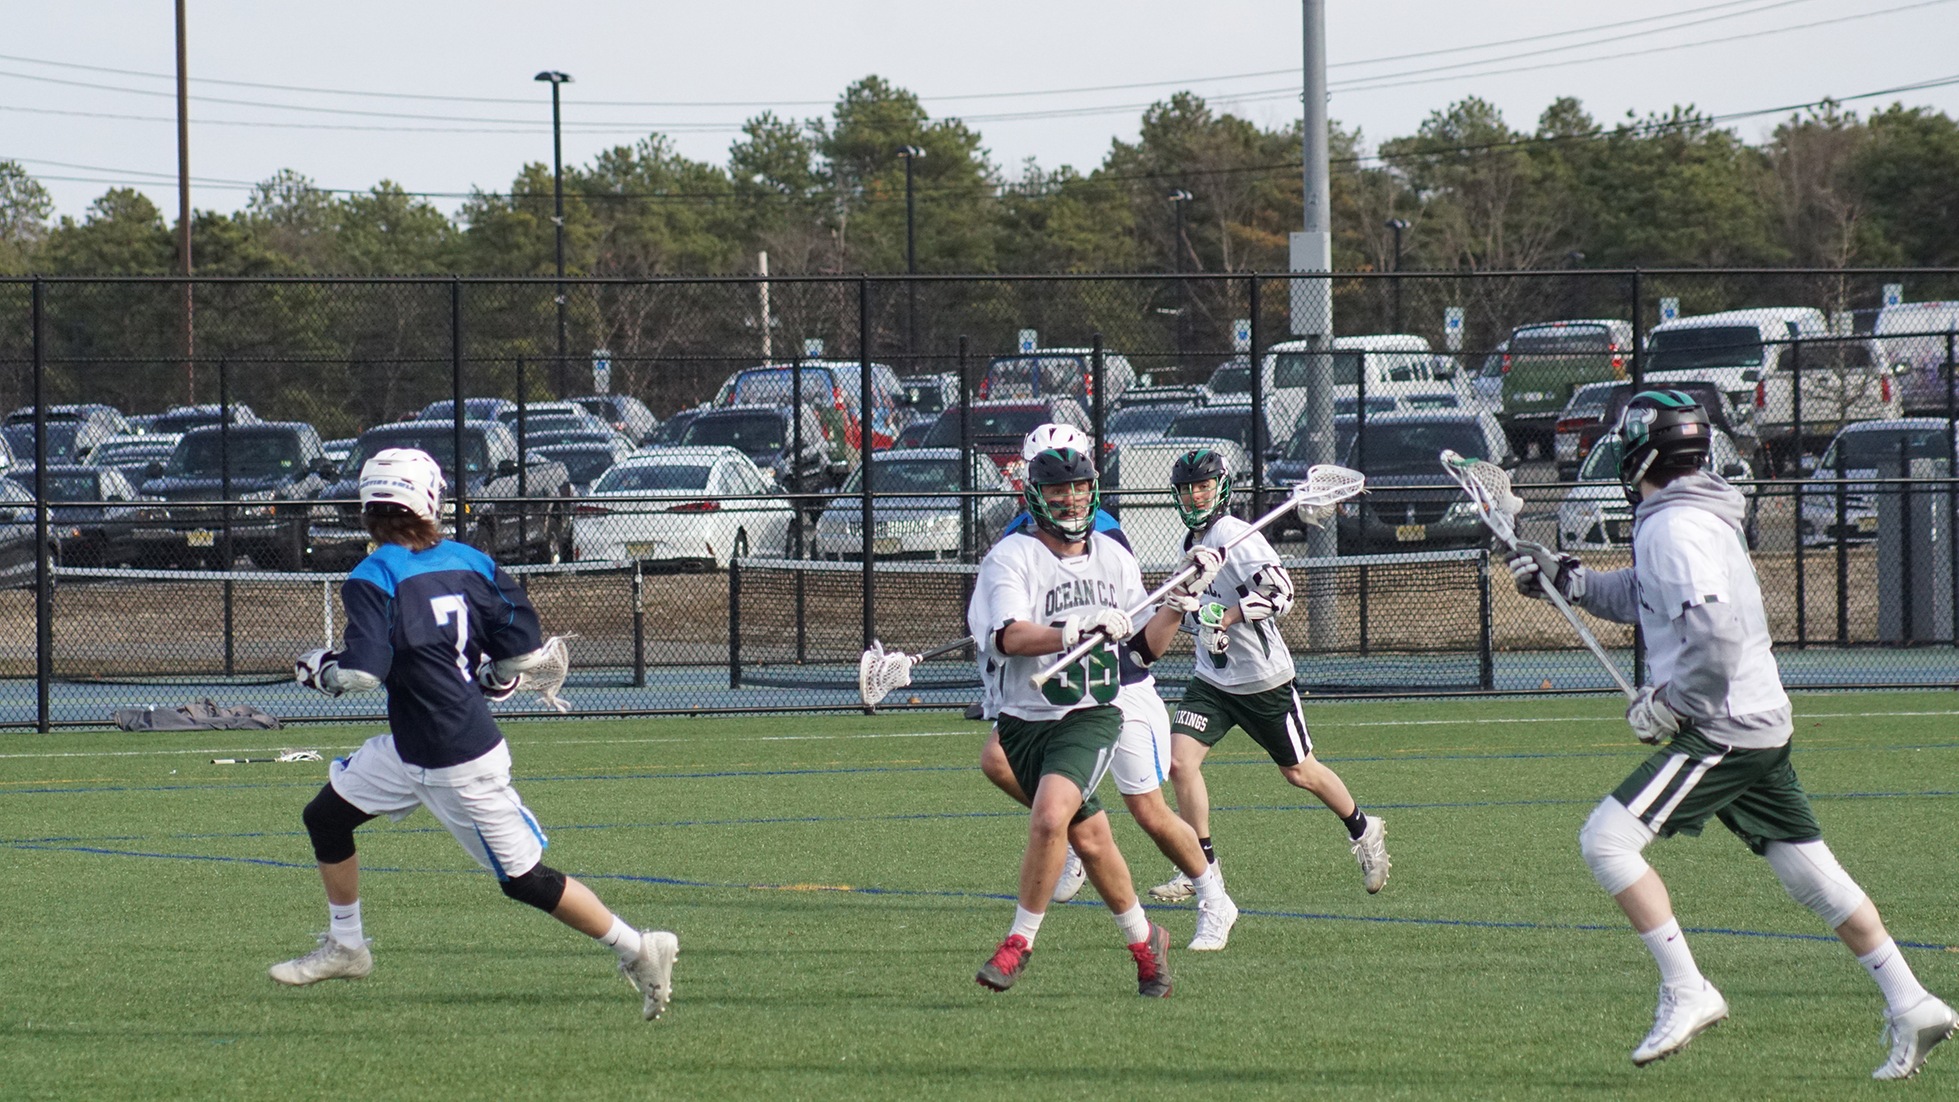 OCC Men's Lax Topples Potomac State College of WVU, 16-6